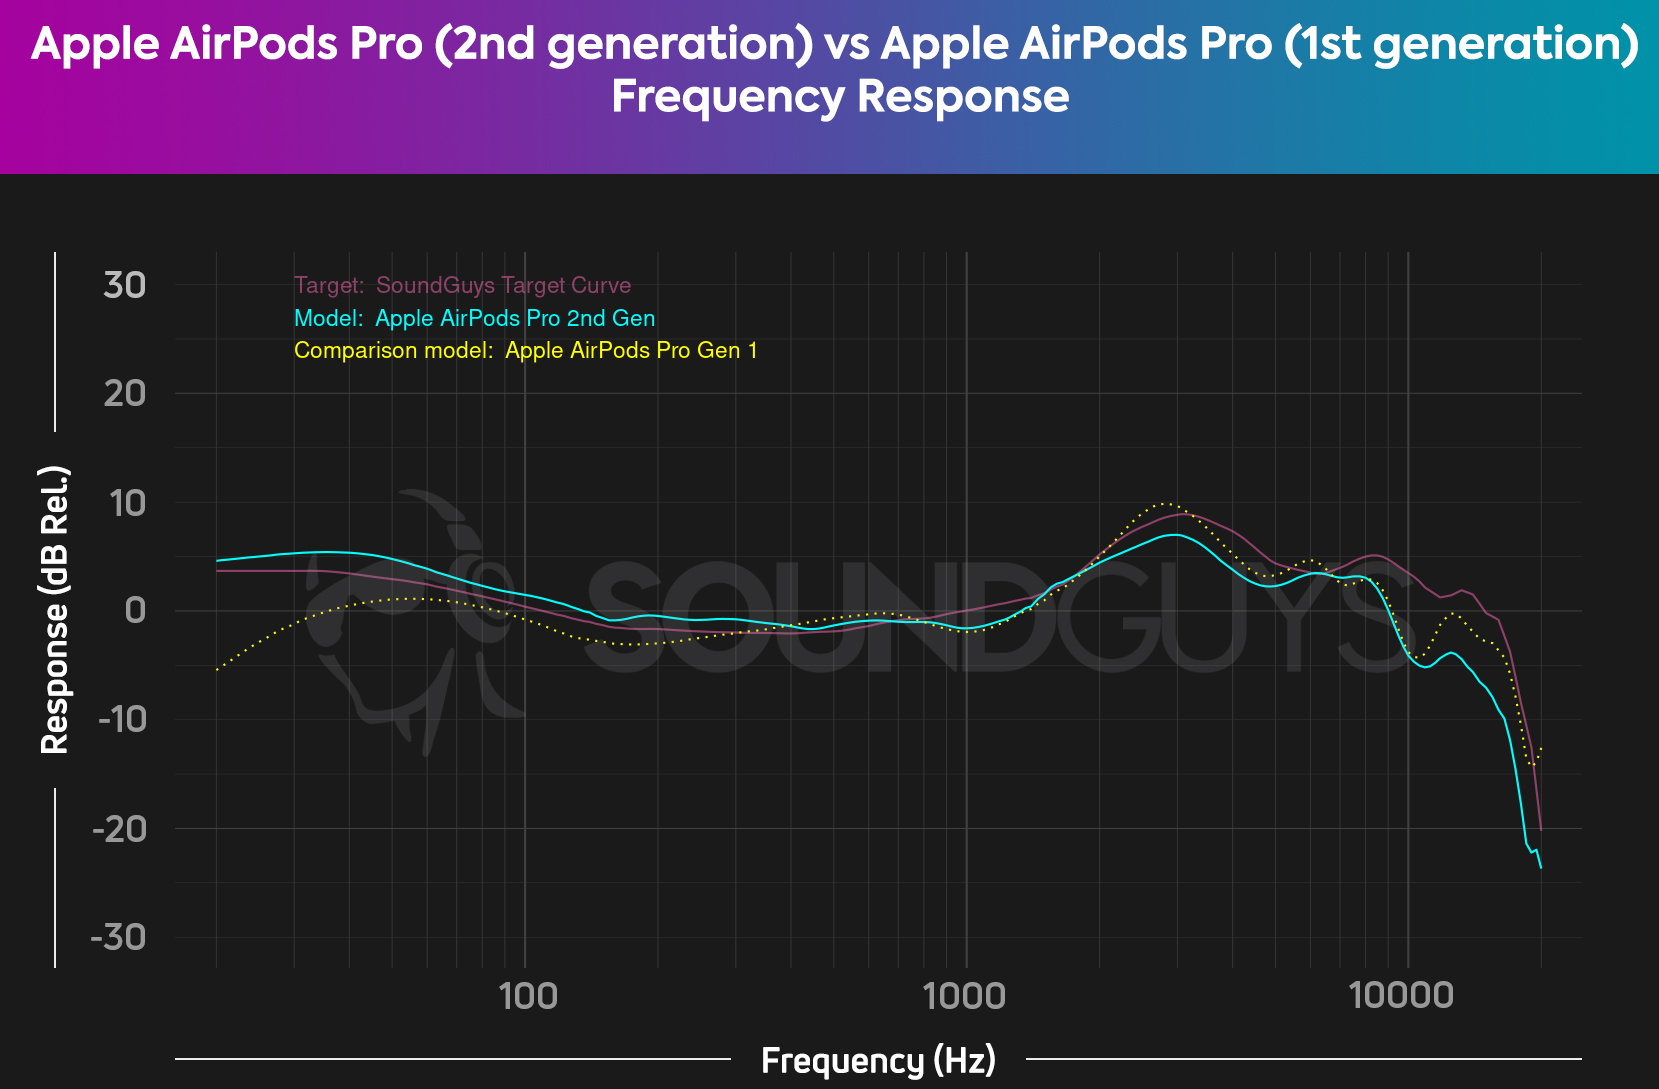 A comparison chart for the Apple AirPods Pro (1st generation) and Apple AirPods Pro (2nd generation) frequency response, showing improved low-end output.